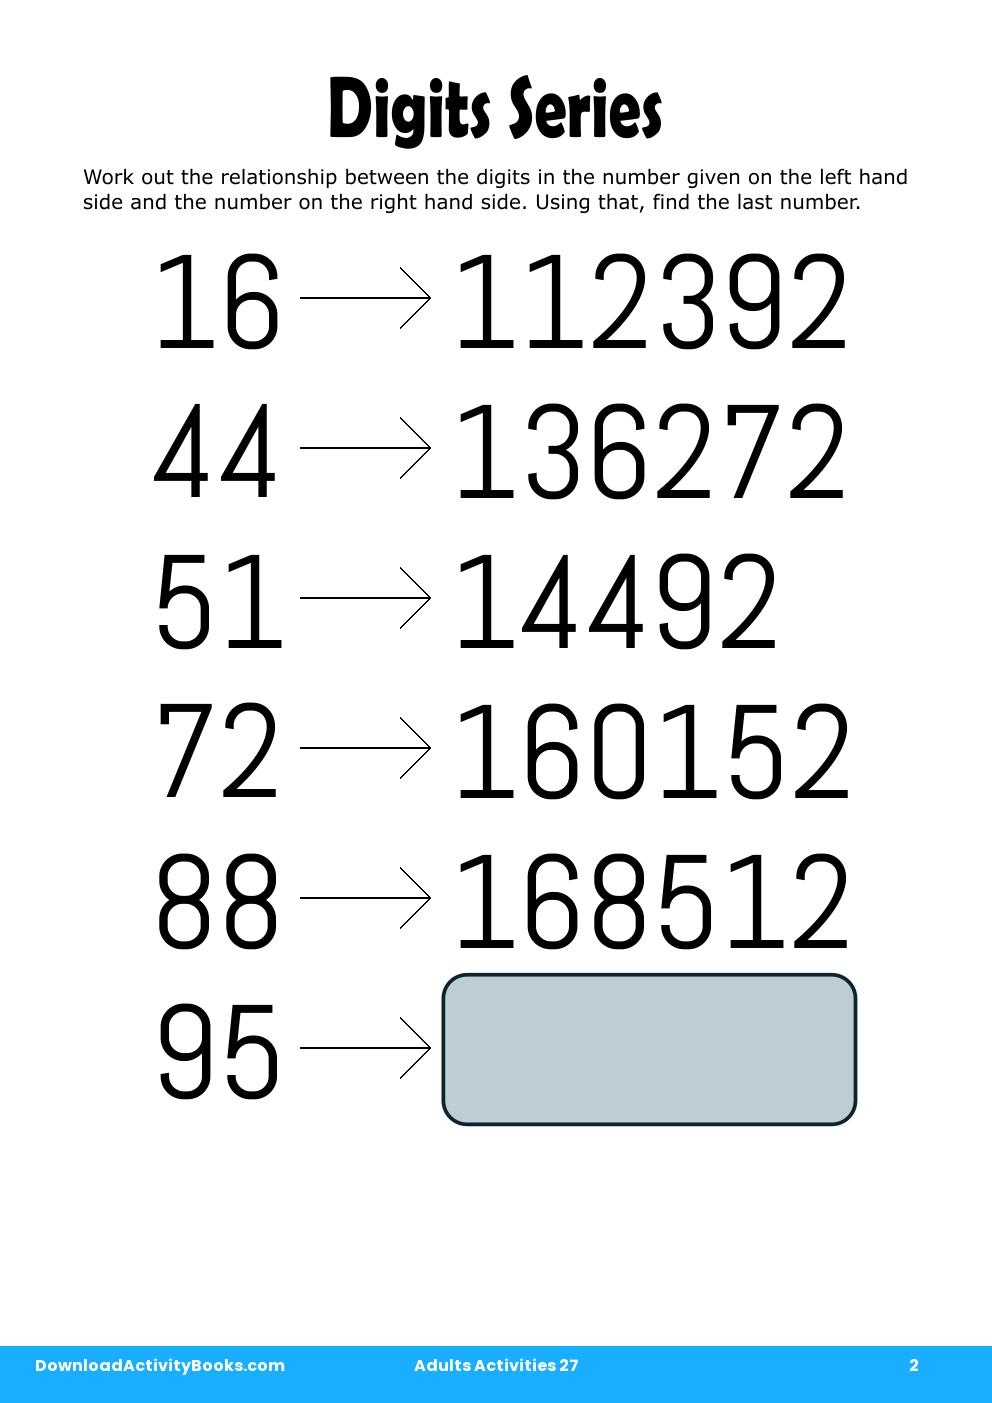 Digits Series in Adults Activities 27